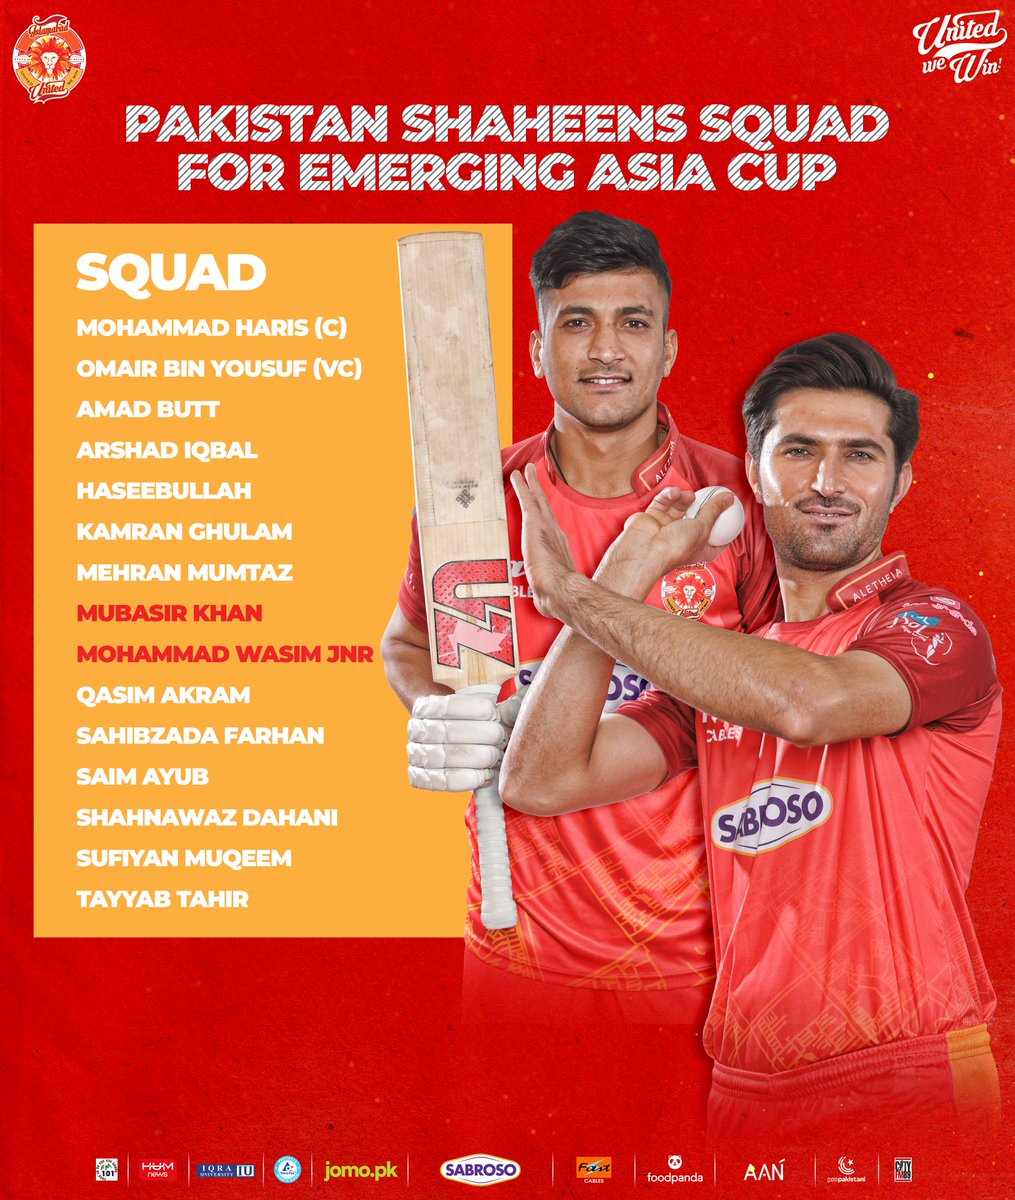 Our #Sherus🦁 Wasim Jr and Mubasir Khan will be roaring in Pakistan green for the Emerging Asia Cup!

Good luck to everyone, chha jao boys 🇵🇰💚

#UnitedWeWin